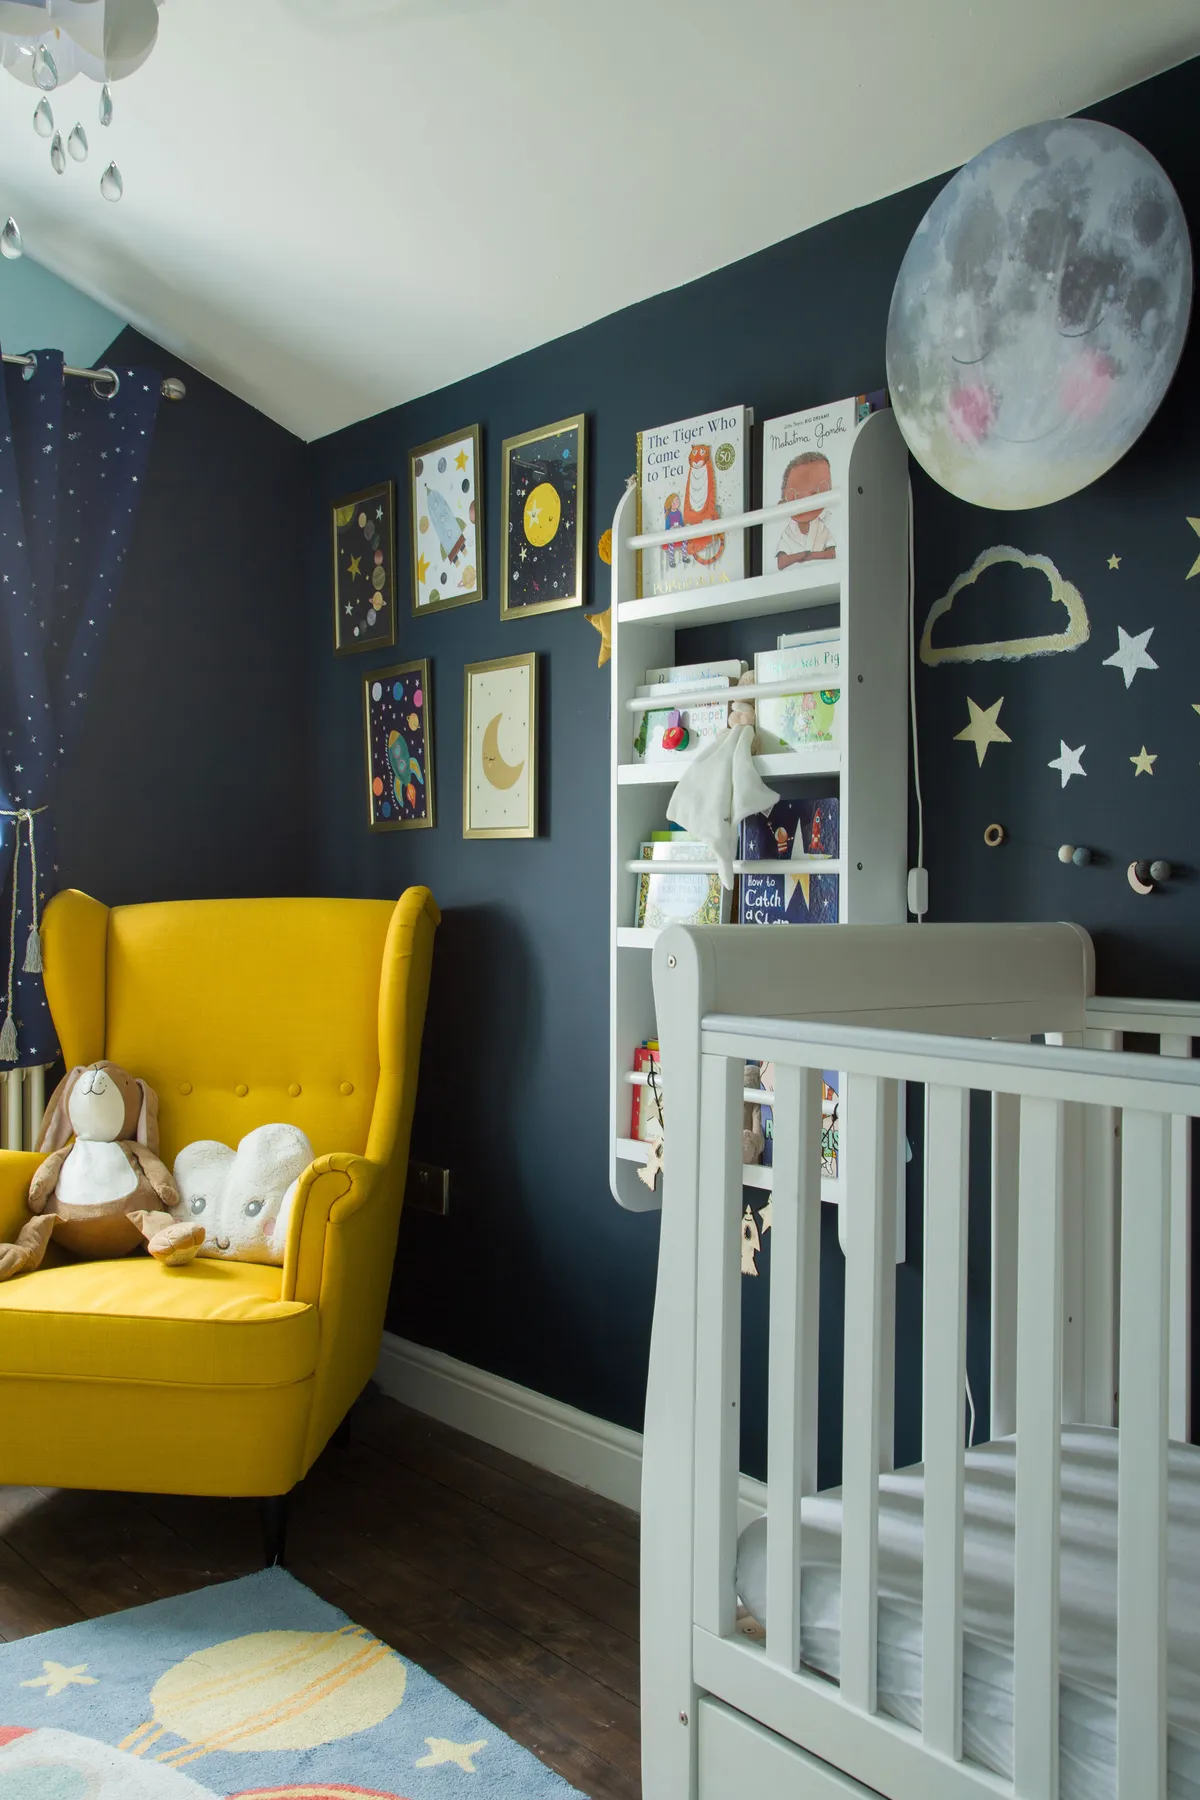 Painting simple motifs on the wall is an easy way to add cute detail to a child’s room. ‘I love the wall mural,’ says Kate. ‘I painted it when I was heavily pregnant and used paints from Vintro for the stars and clouds’